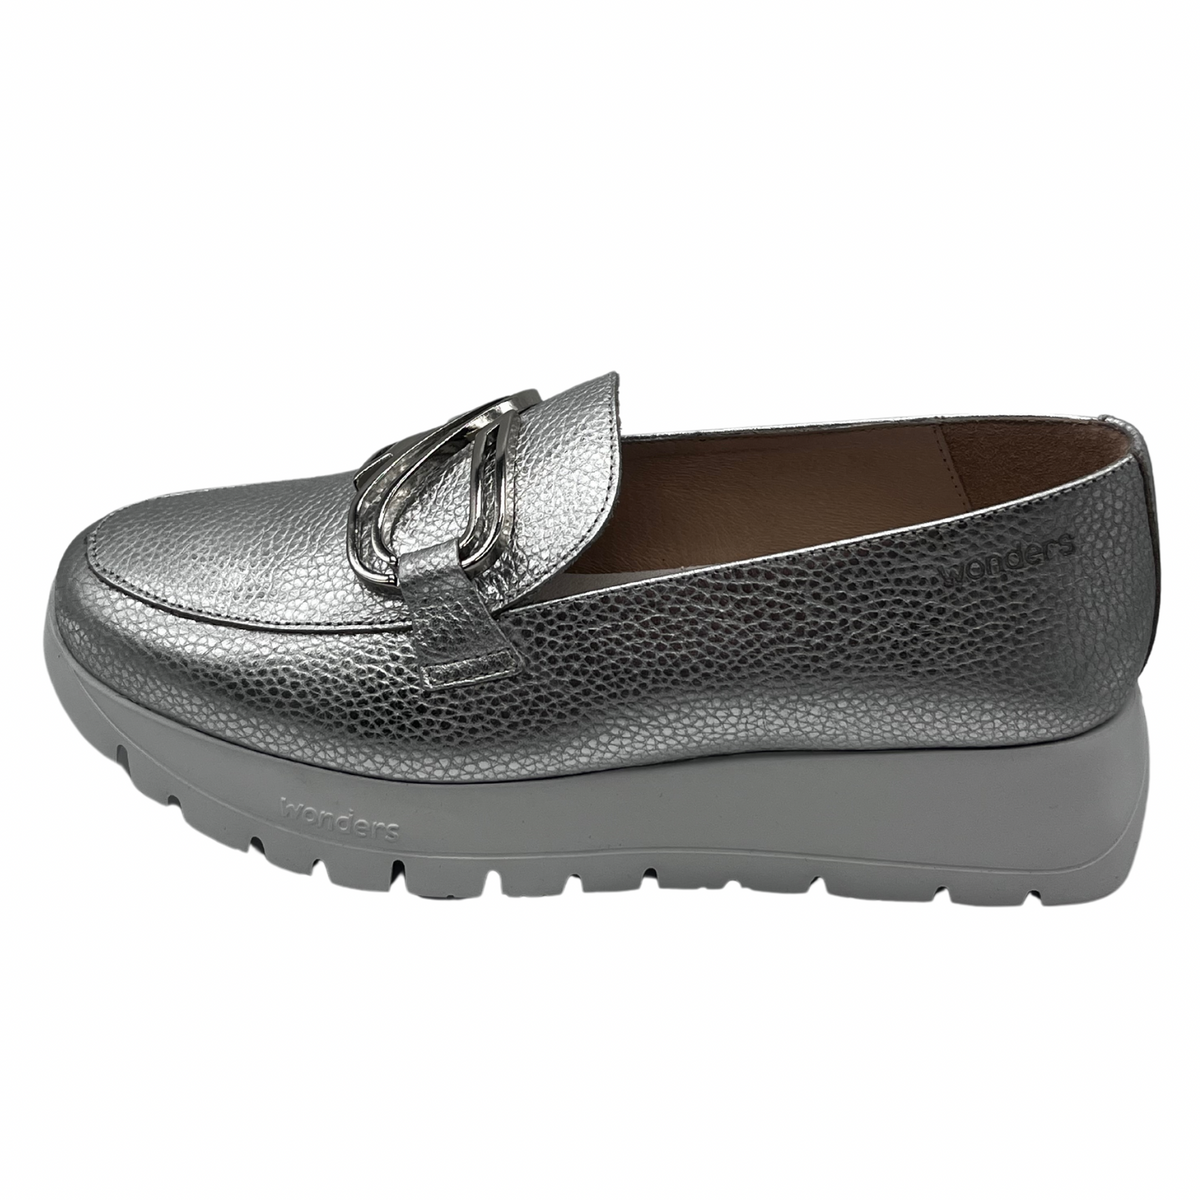 Wonders Silver Metallic Leather Loafers